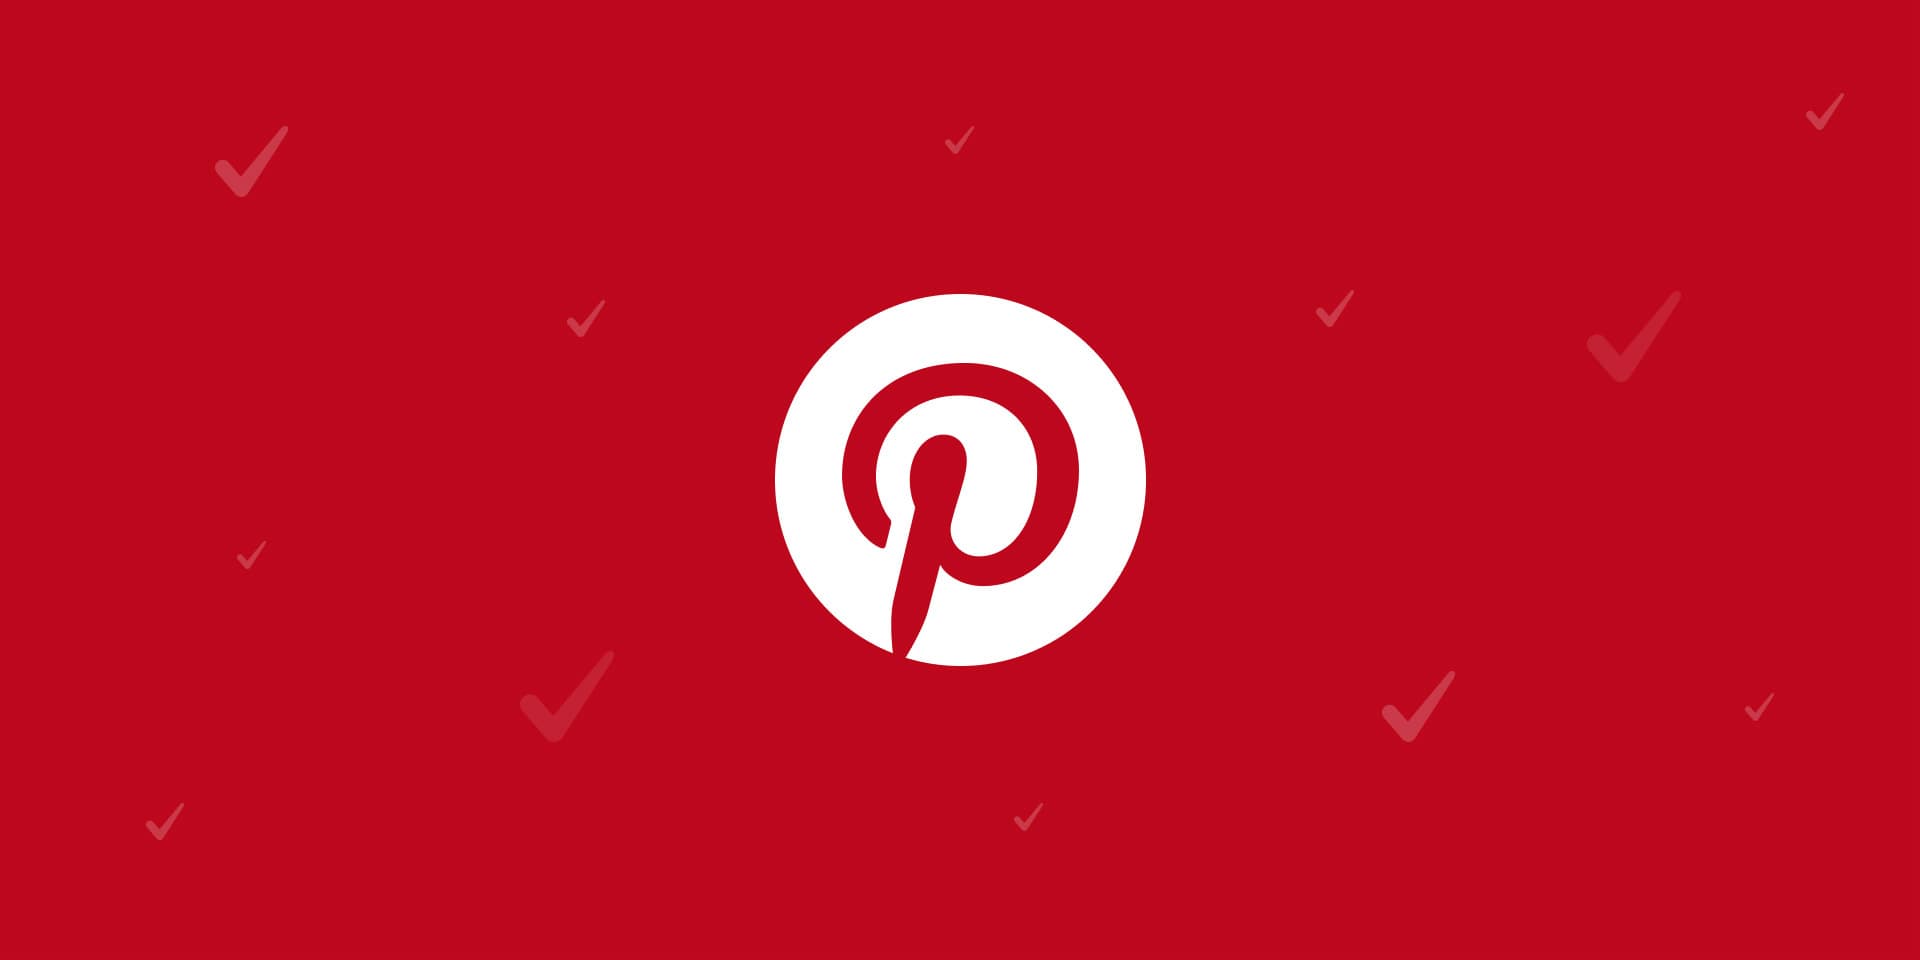 how to get more followers on pinterest